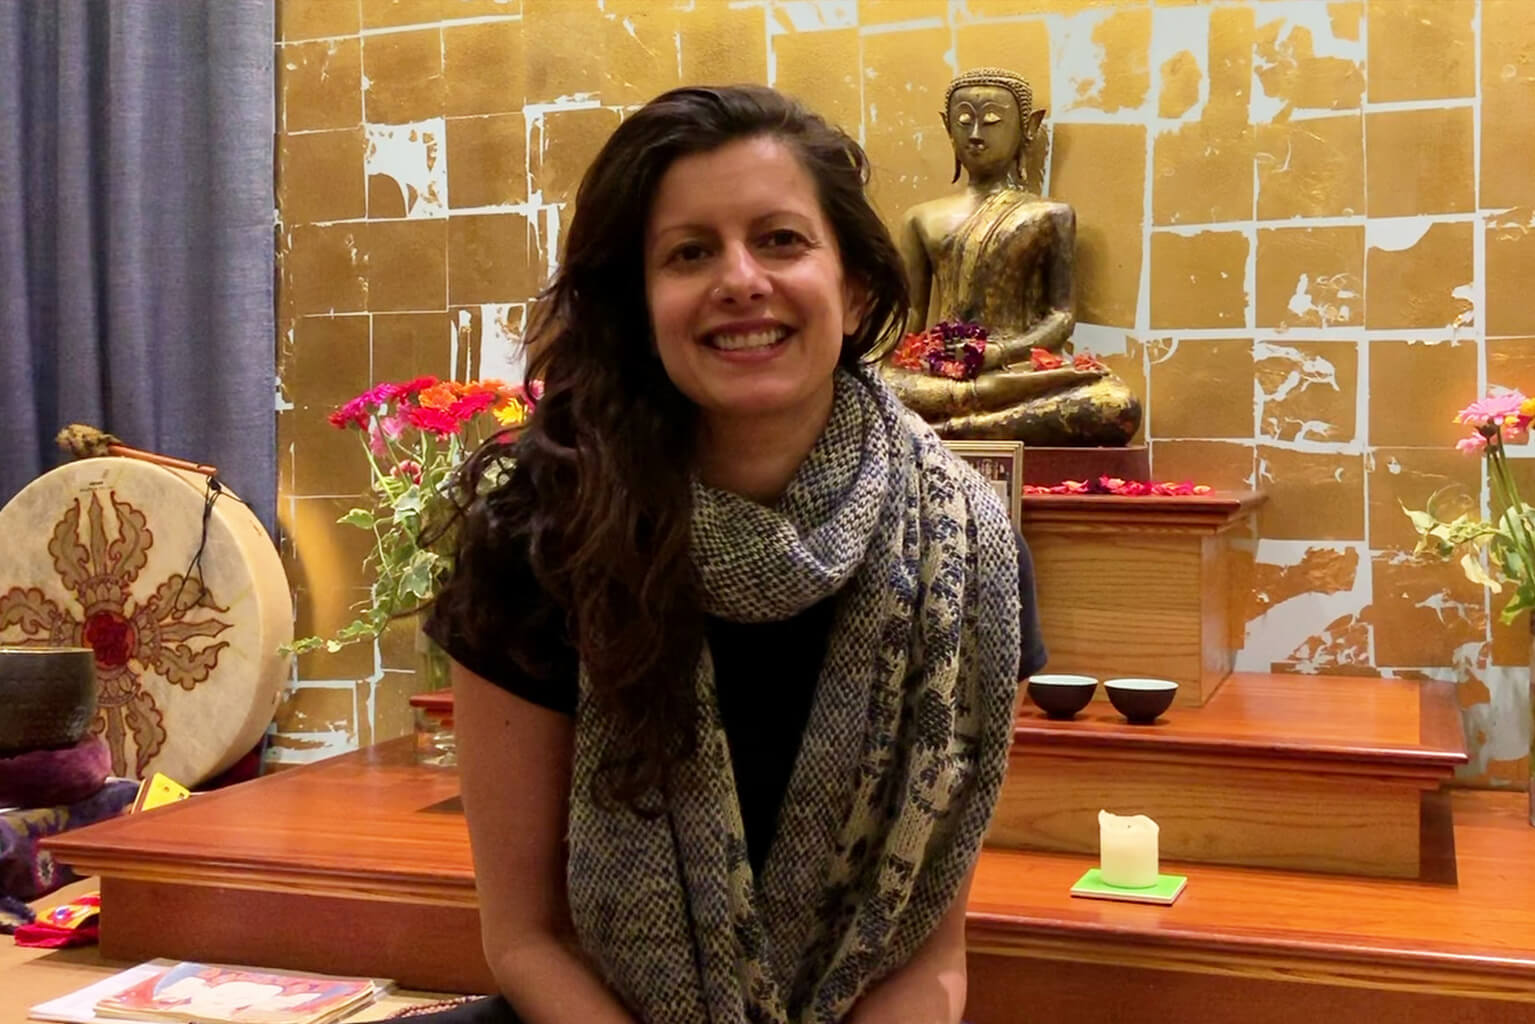 Rina Modi, graduate from the 2019 Elton Yoga London Yoga Teacher Training sits with us in the shrine room at the West London Buddhist Centre to tell us about her experiences on the training.